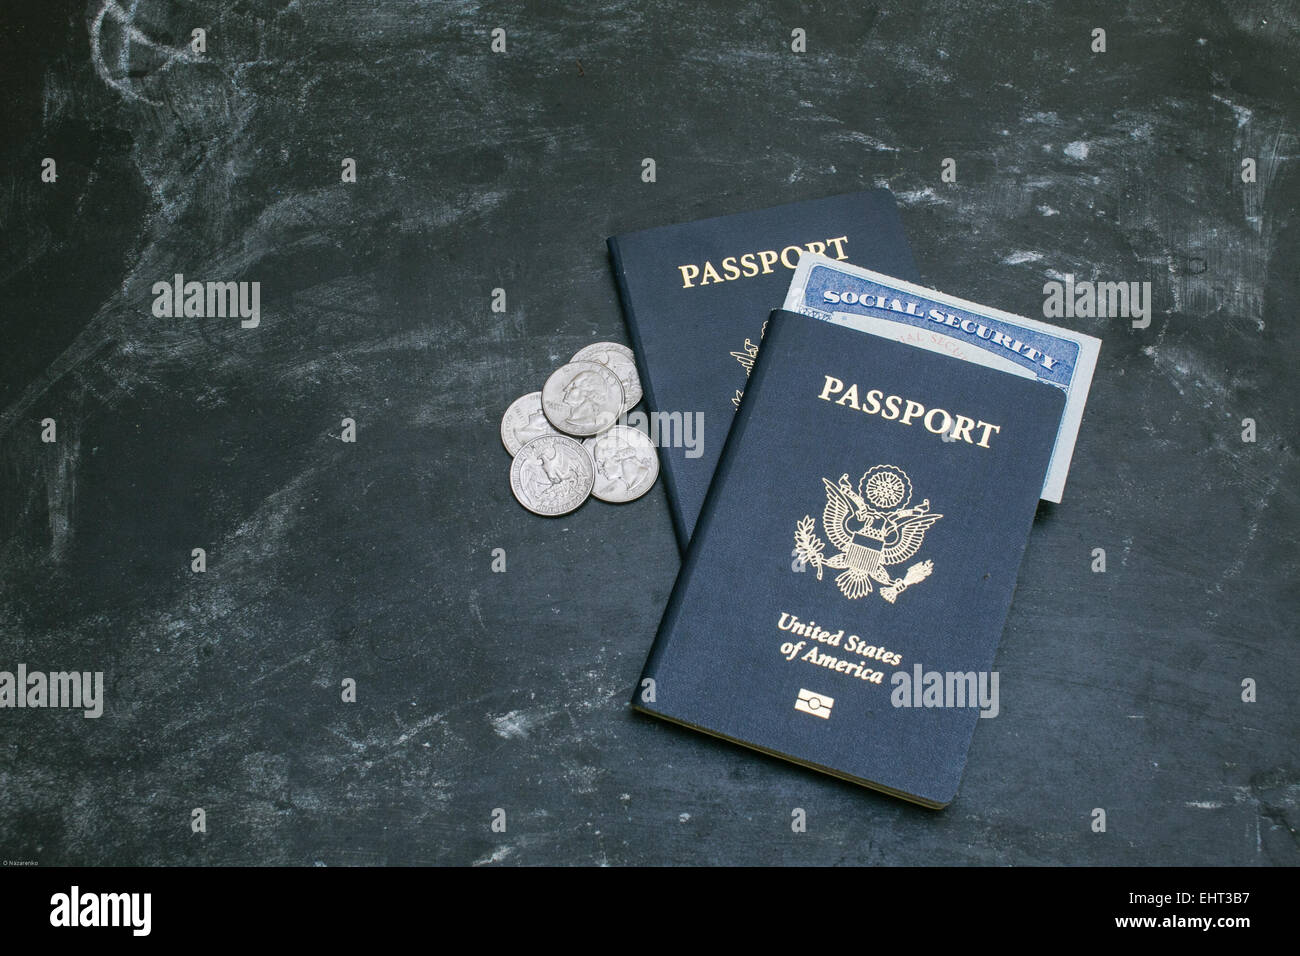 Two American passports on black background. American citizenship. Social security card in a document. Traveling around the world Stock Photo